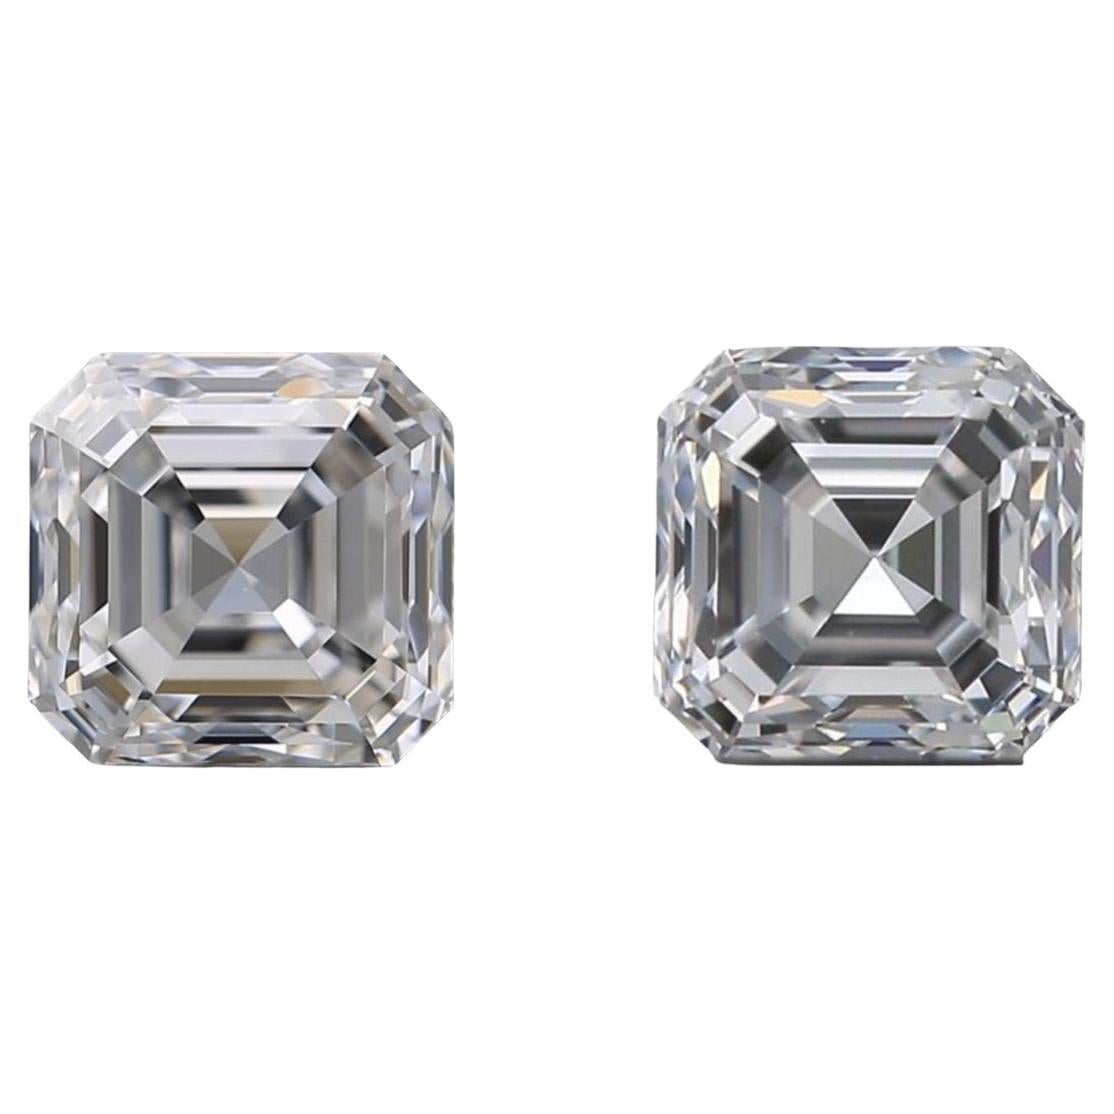 Natural Pair of Asher Diamond in a 1.85 Carat Total Weight with D VVS1, GIA Cert For Sale